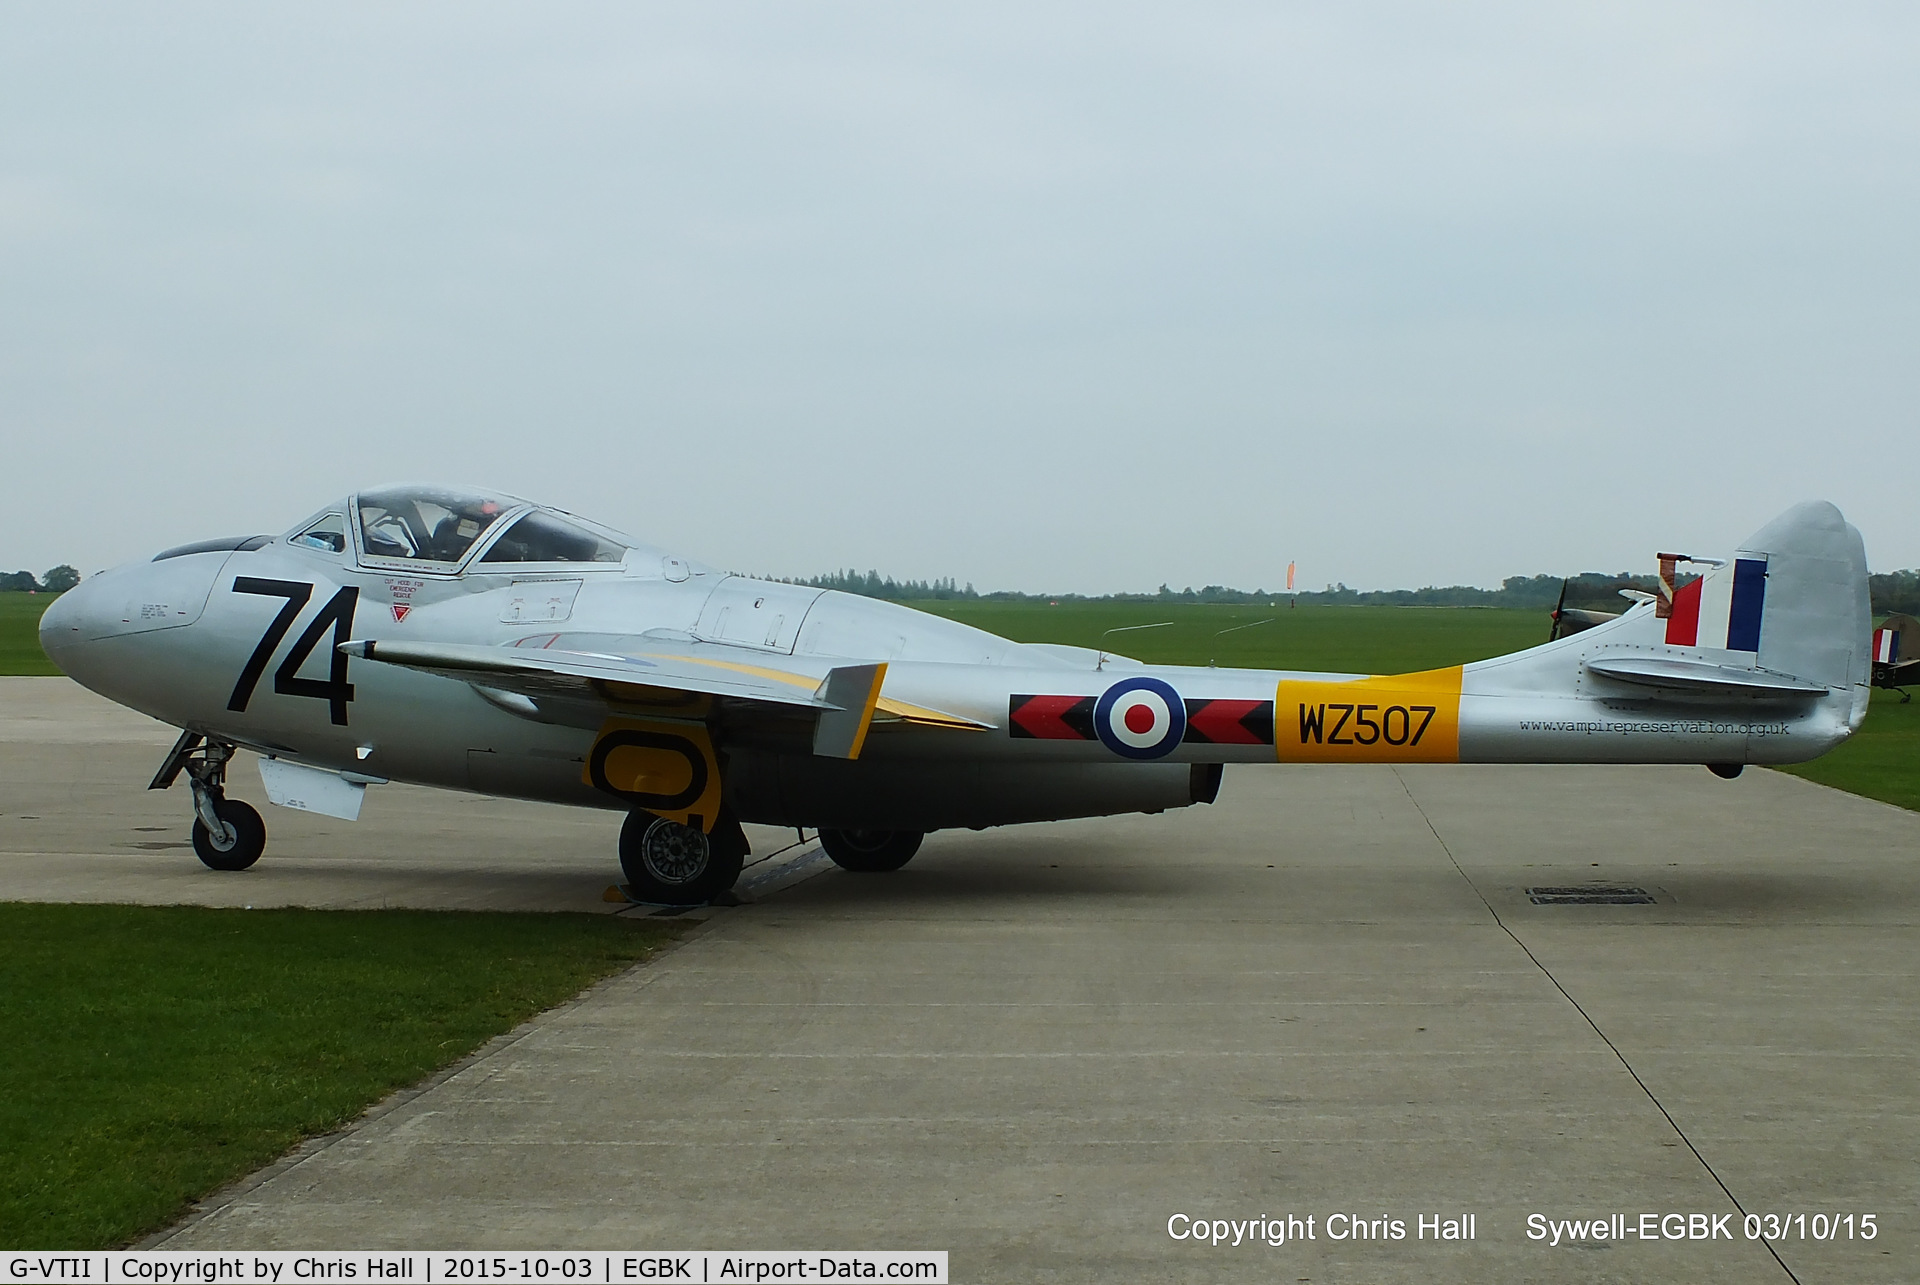 G-VTII, 1954 De Havilland DH-115 Vampire T.11 C/N 15127, at The Radial And Training Aircraft Fly-in